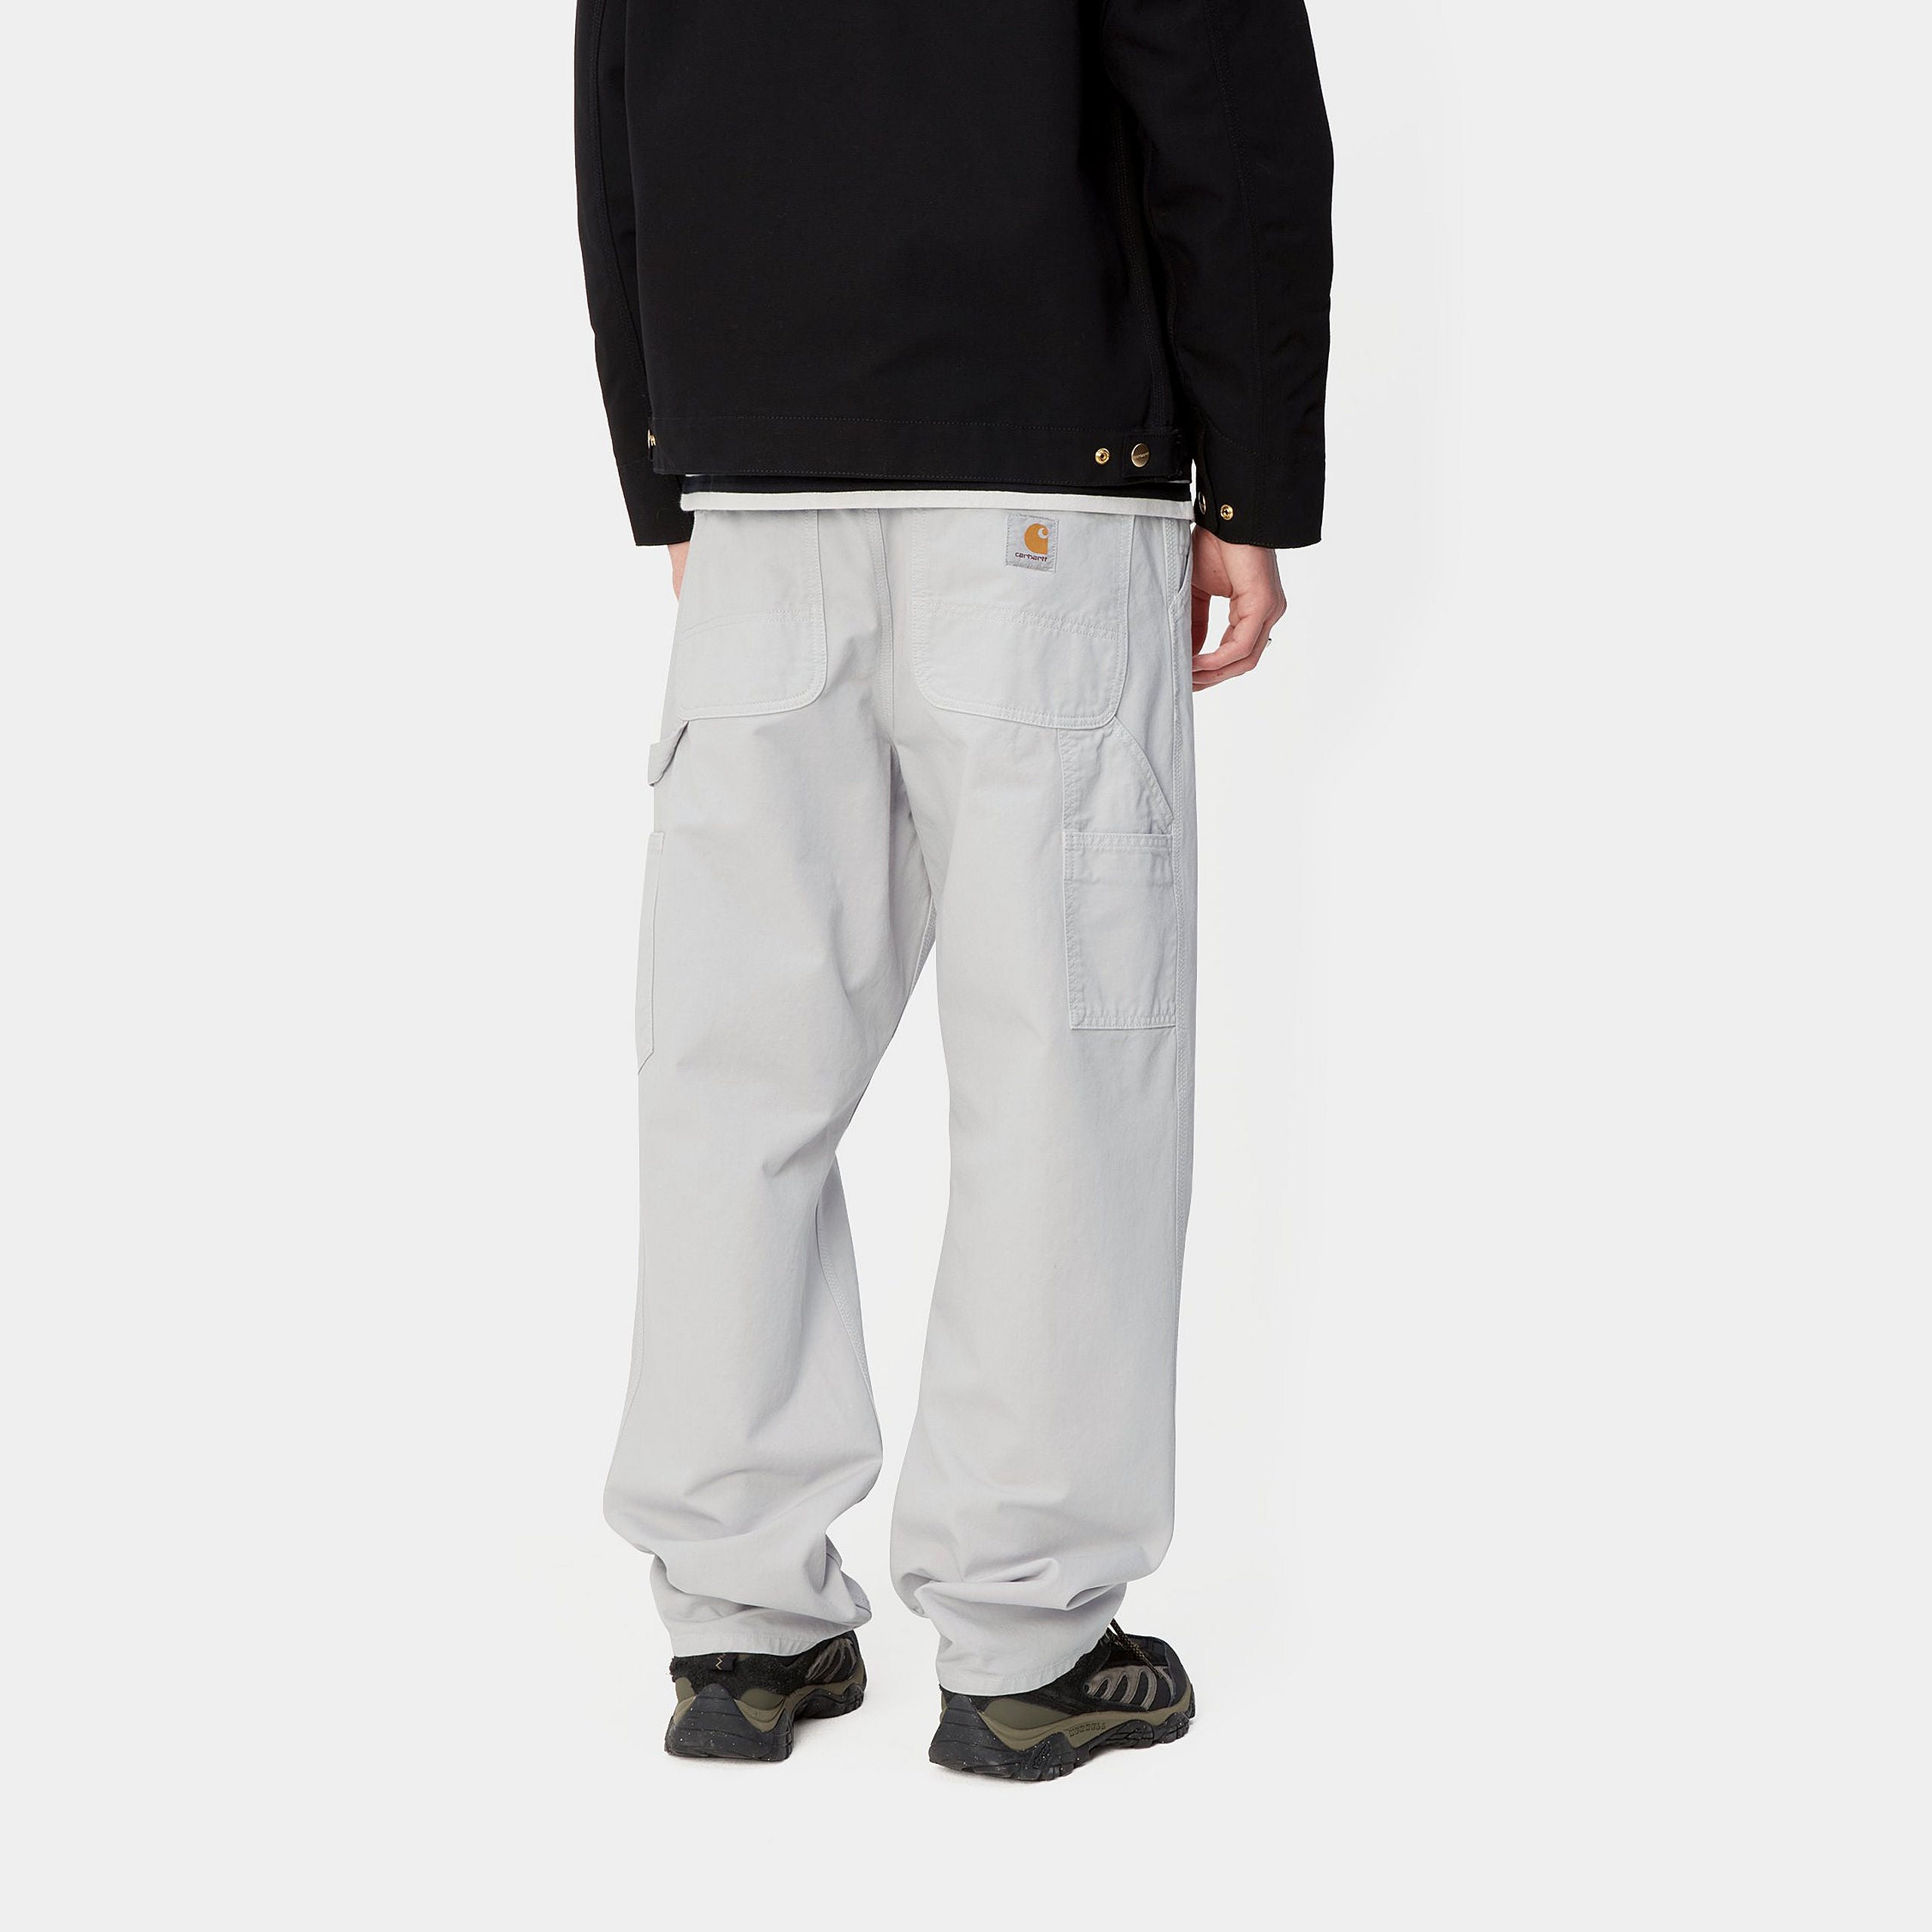 Carhartt Wip Single Knee Pant Cotton Pant Newcomb Drill Uomo